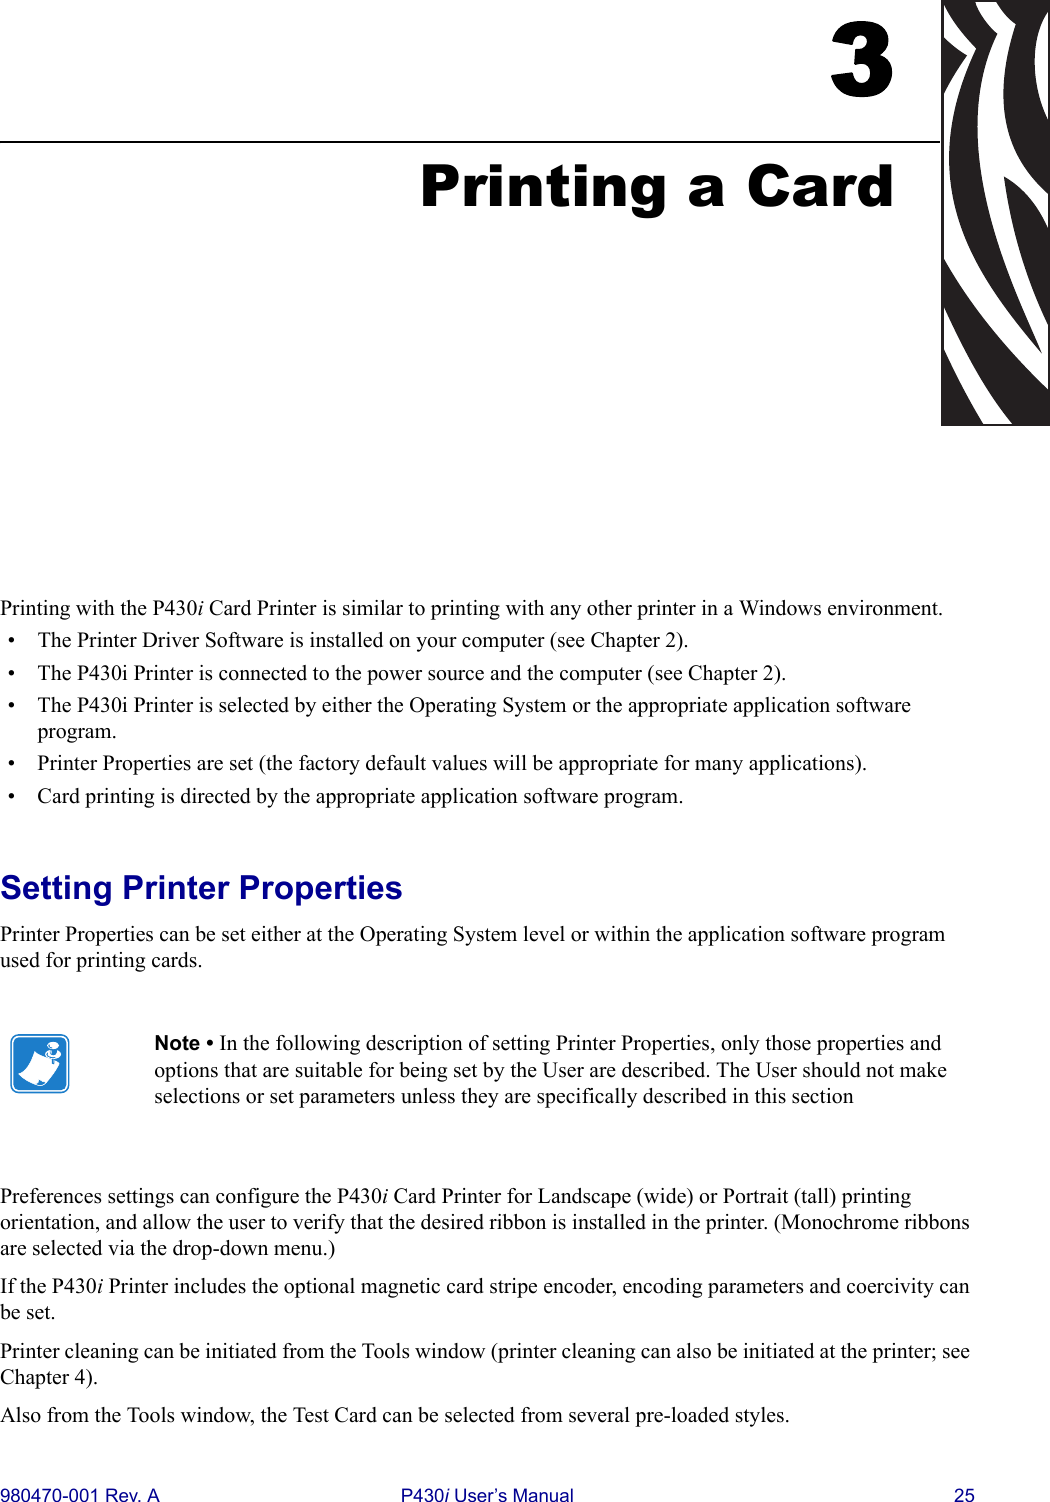 980470-001 Rev. A P430i User’s Manual 253Printing a CardPrinting with the P430i Card Printer is similar to printing with any other printer in a Windows environment.• The Printer Driver Software is installed on your computer (see Chapter 2).• The P430i Printer is connected to the power source and the computer (see Chapter 2).• The P430i Printer is selected by either the Operating System or the appropriate application software program.• Printer Properties are set (the factory default values will be appropriate for many applications).• Card printing is directed by the appropriate application software program.Setting Printer PropertiesPrinter Properties can be set either at the Operating System level or within the application software program used for printing cards.Preferences settings can configure the P430i Card Printer for Landscape (wide) or Portrait (tall) printing orientation, and allow the user to verify that the desired ribbon is installed in the printer. (Monochrome ribbons are selected via the drop-down menu.)If the P430i Printer includes the optional magnetic card stripe encoder, encoding parameters and coercivity can be set.Printer cleaning can be initiated from the Tools window (printer cleaning can also be initiated at the printer; see Chapter 4).Also from the Tools window, the Test Card can be selected from several pre-loaded styles.Note • In the following description of setting Printer Properties, only those properties and options that are suitable for being set by the User are described. The User should not make selections or set parameters unless they are specifically described in this section